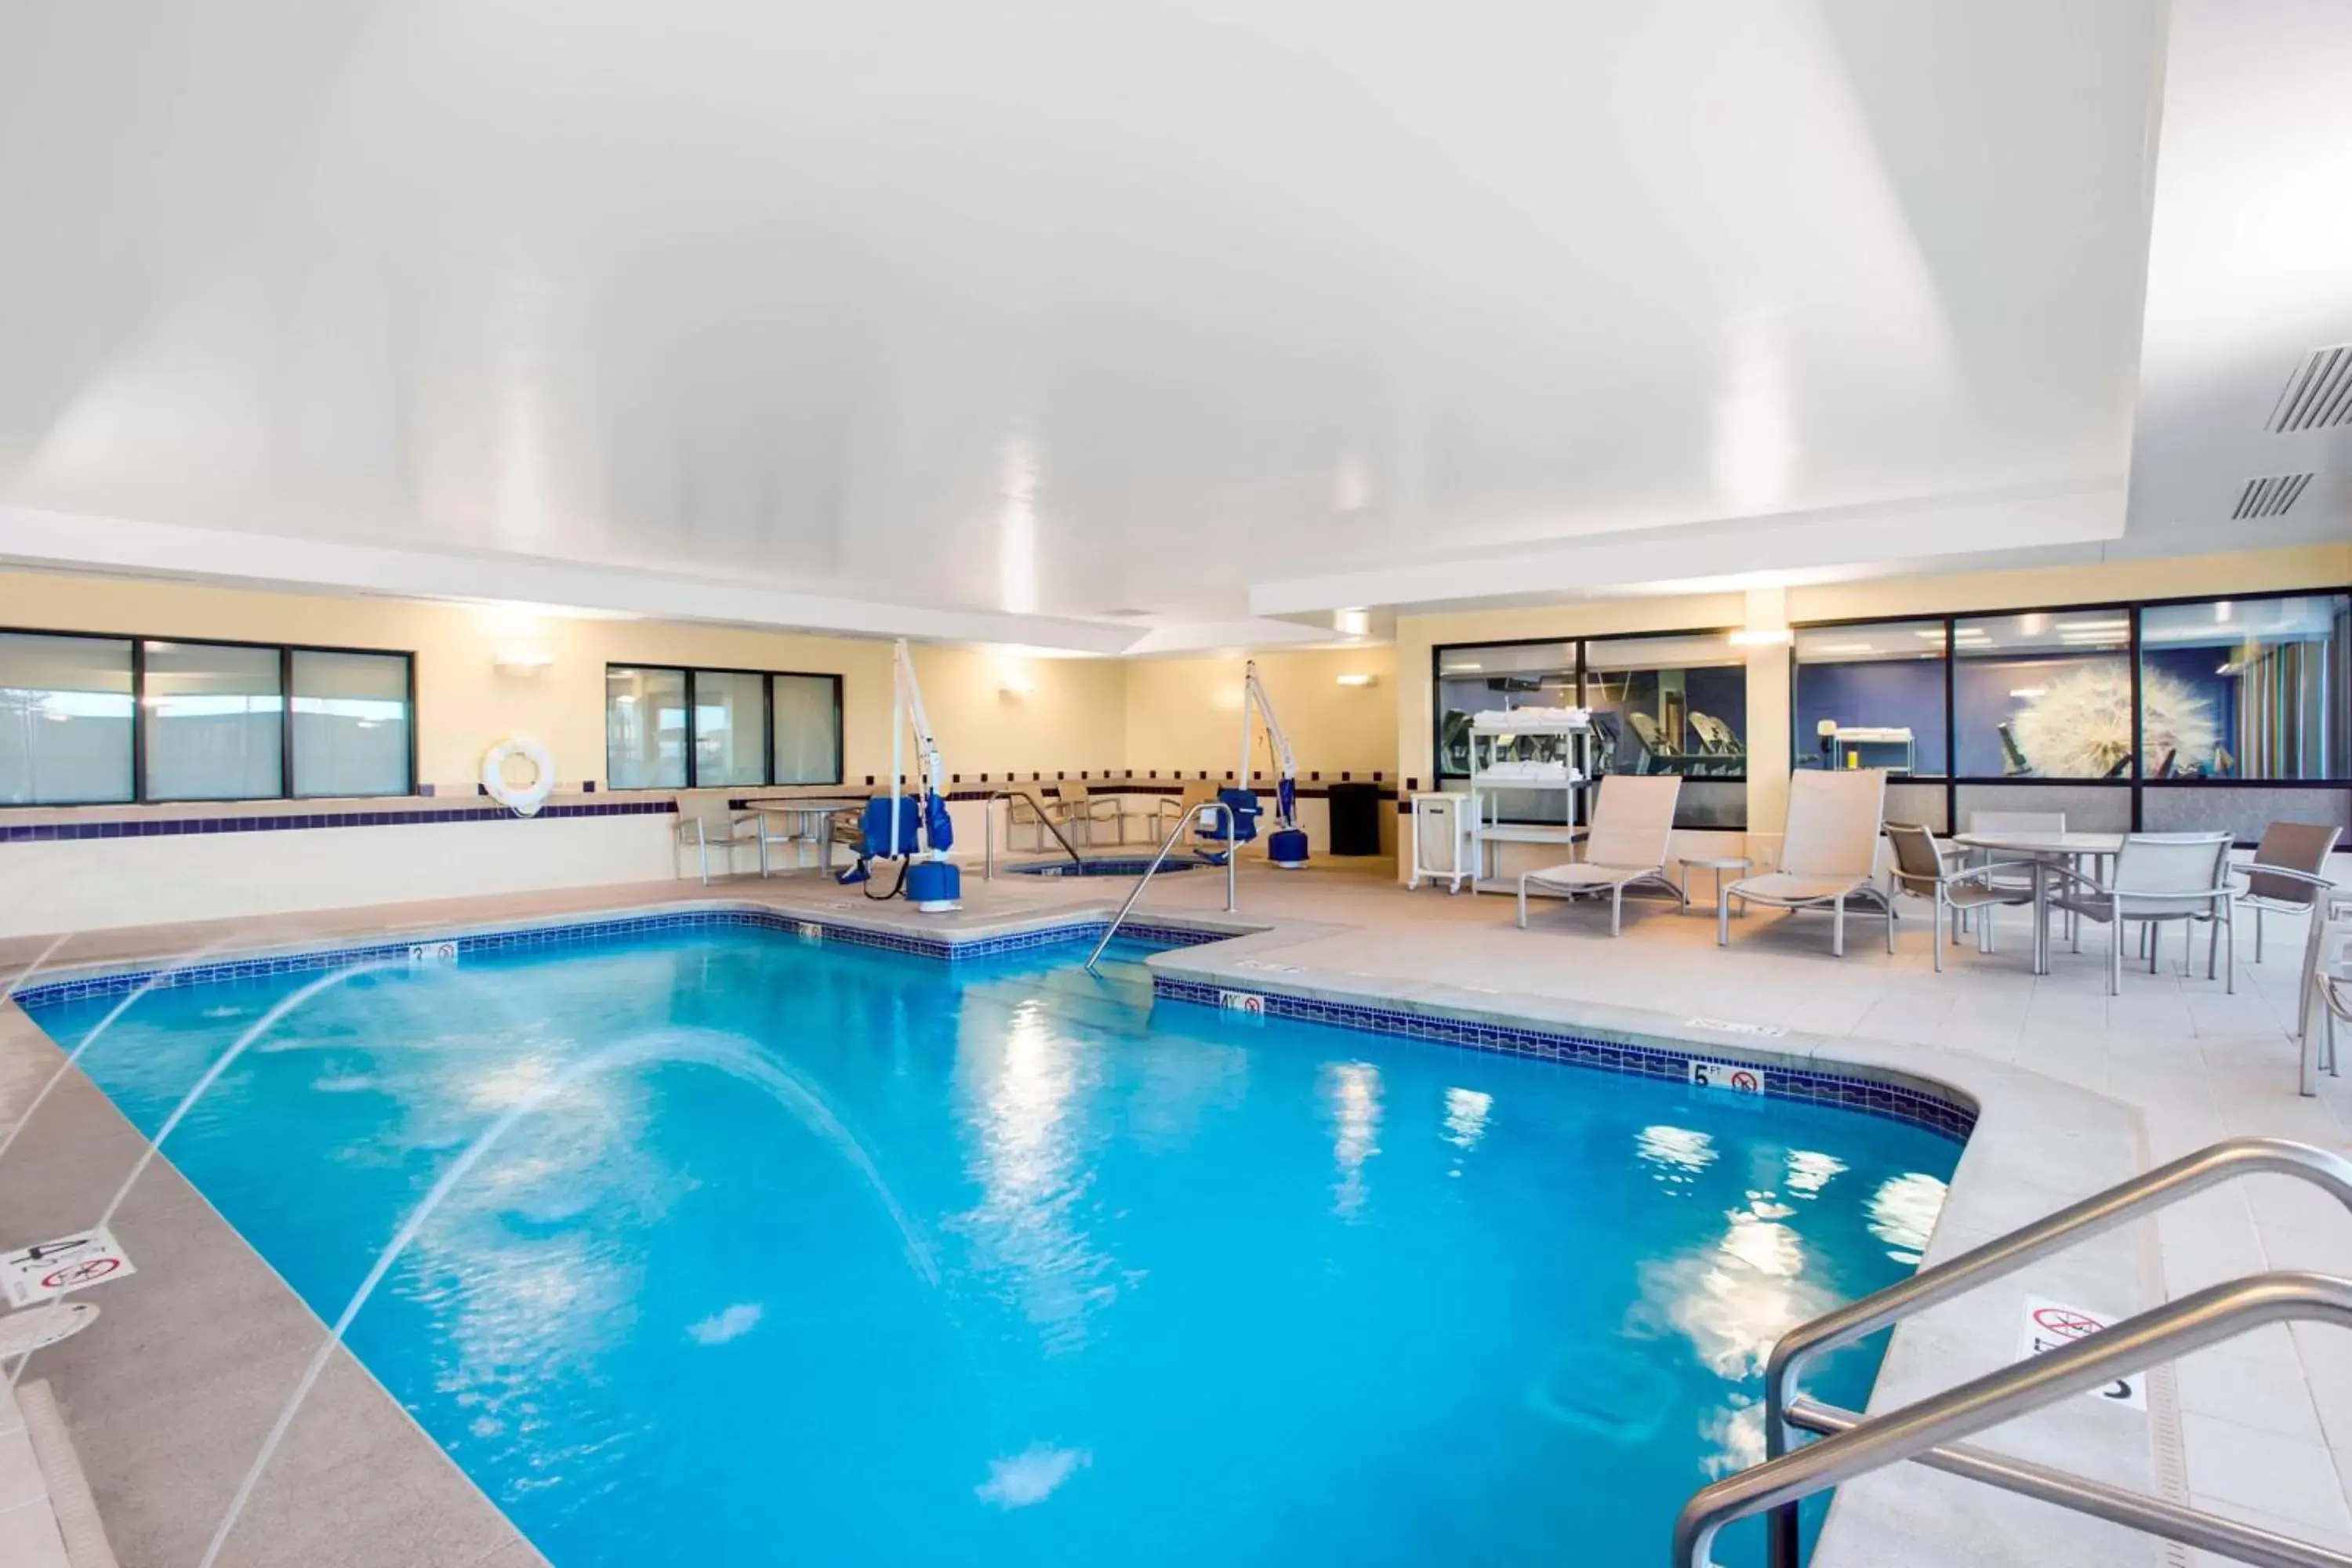 Swimming Pool in SpringHill Suites by Marriott Omaha East, Council Bluffs, IA